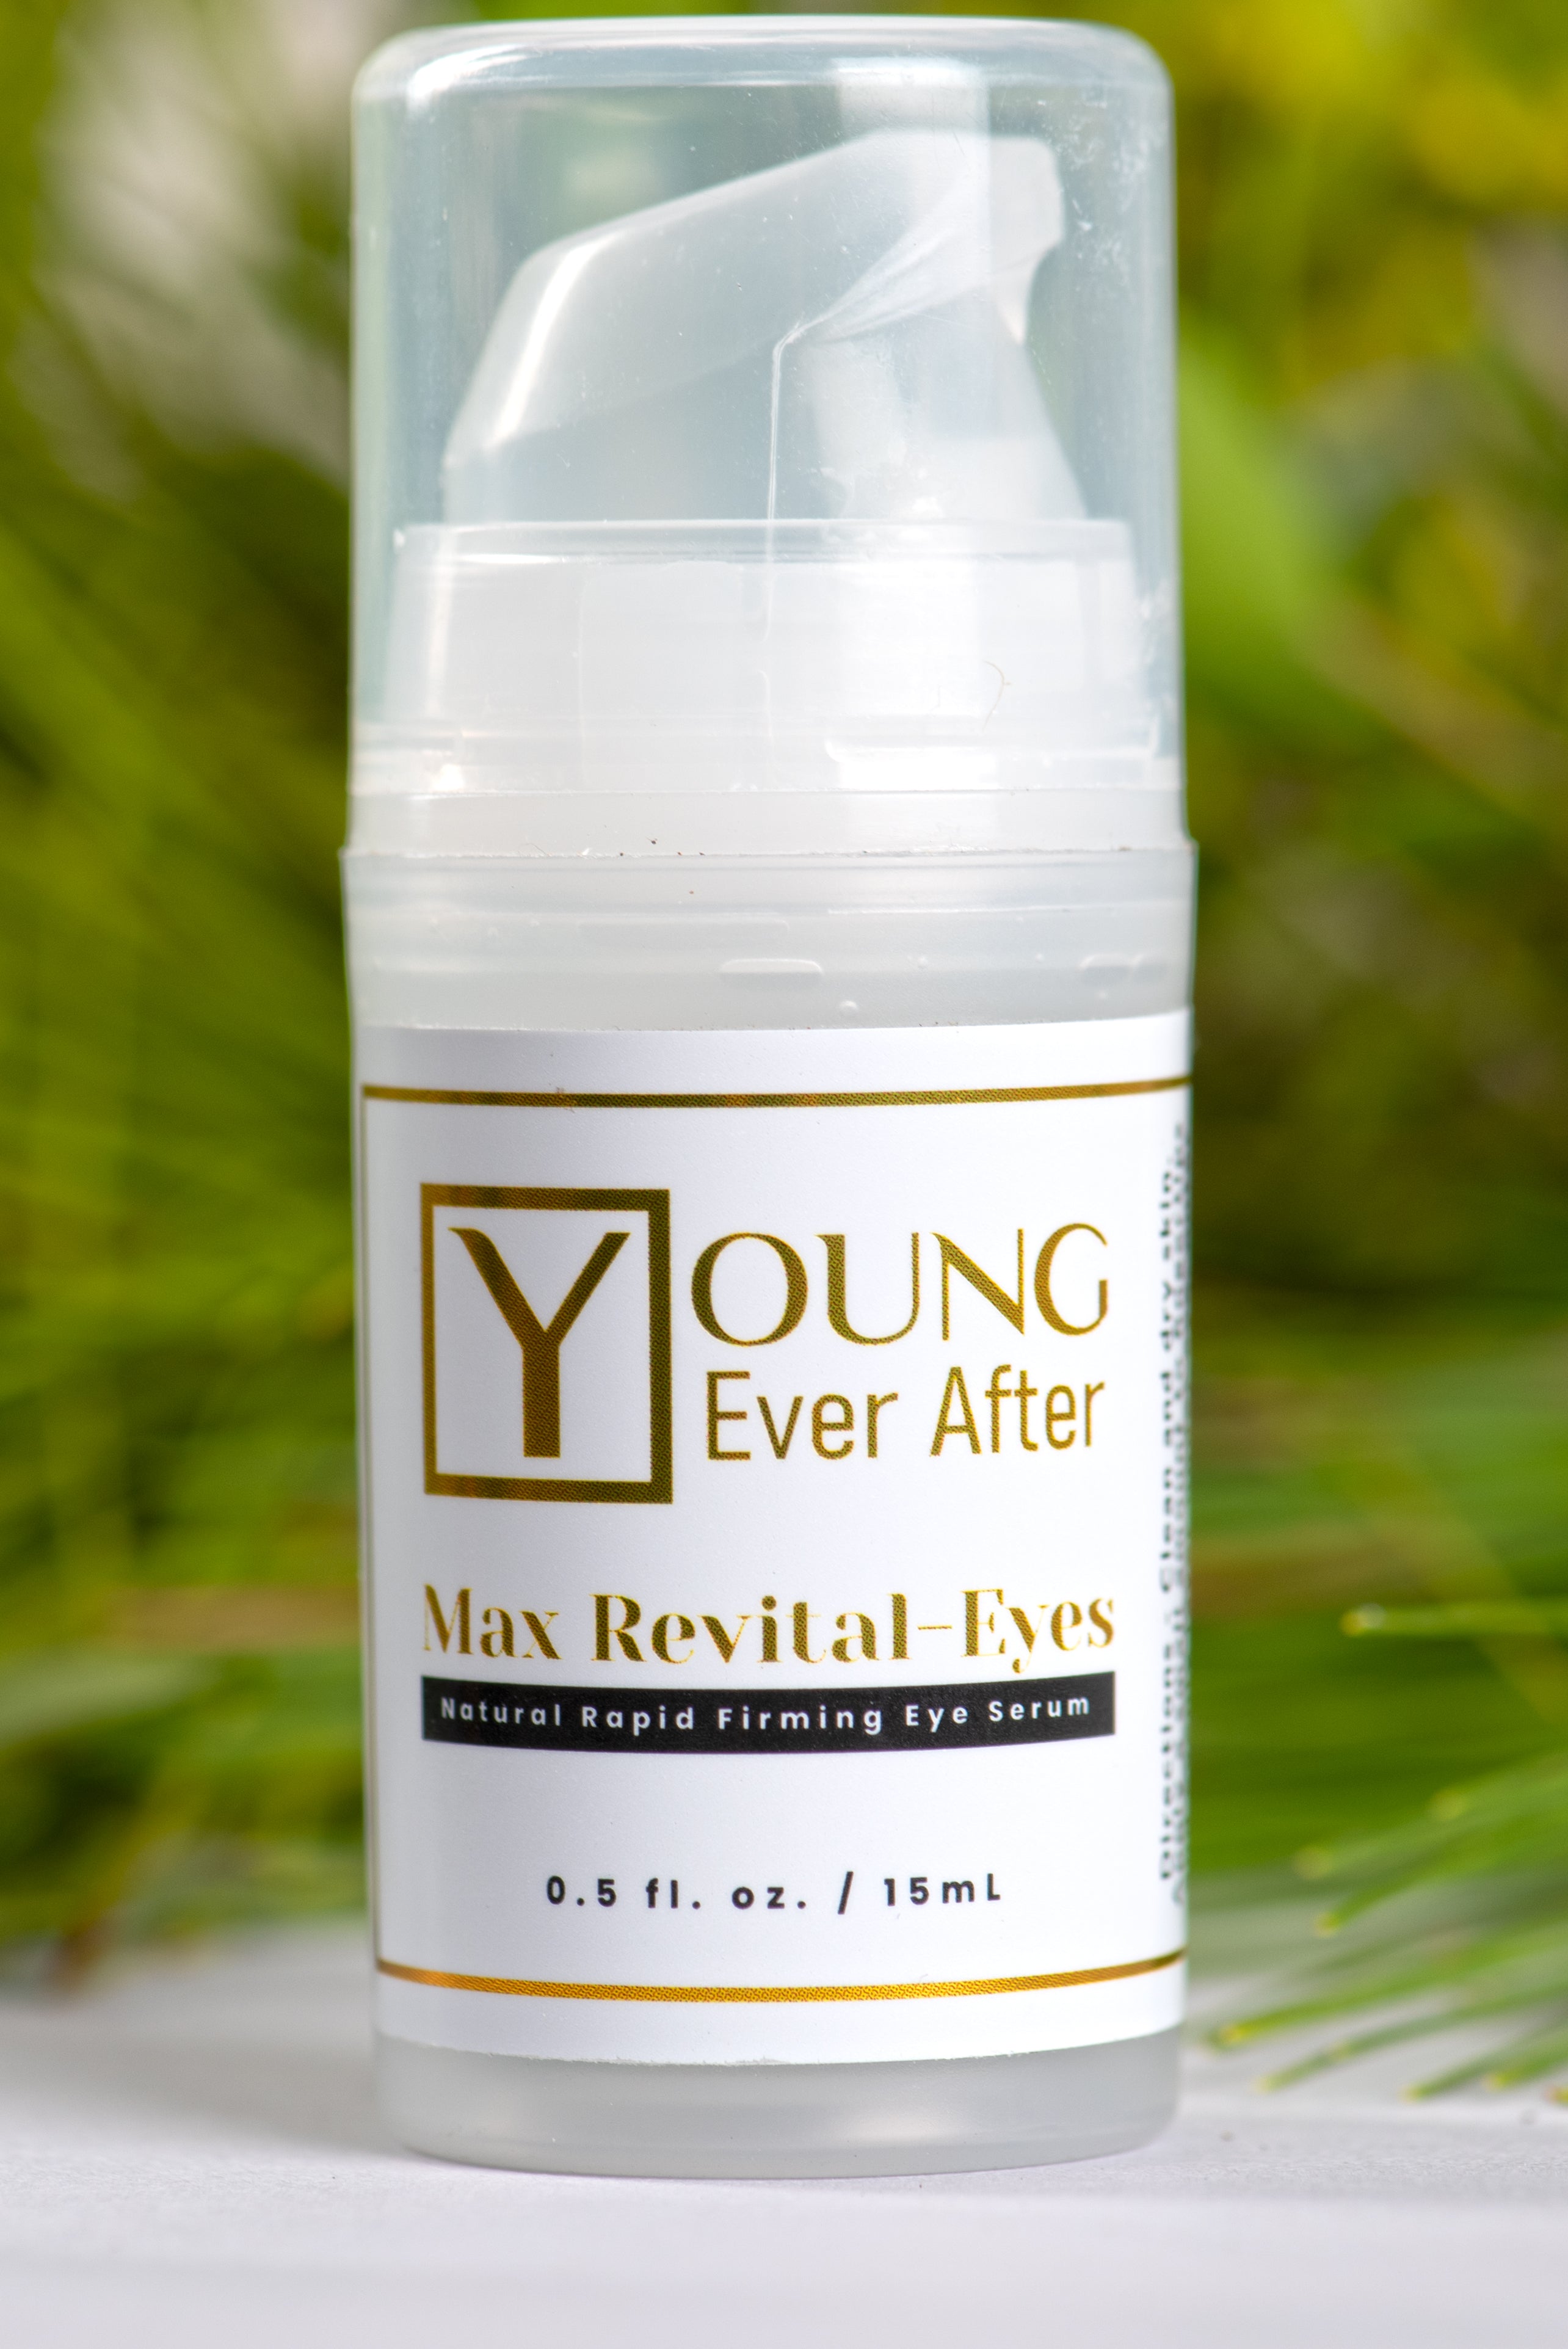 MAX REVITAL-EYES Natural Rapid Firming Eye Serum - GET LIP MASK FREE WITH PURCHASE!